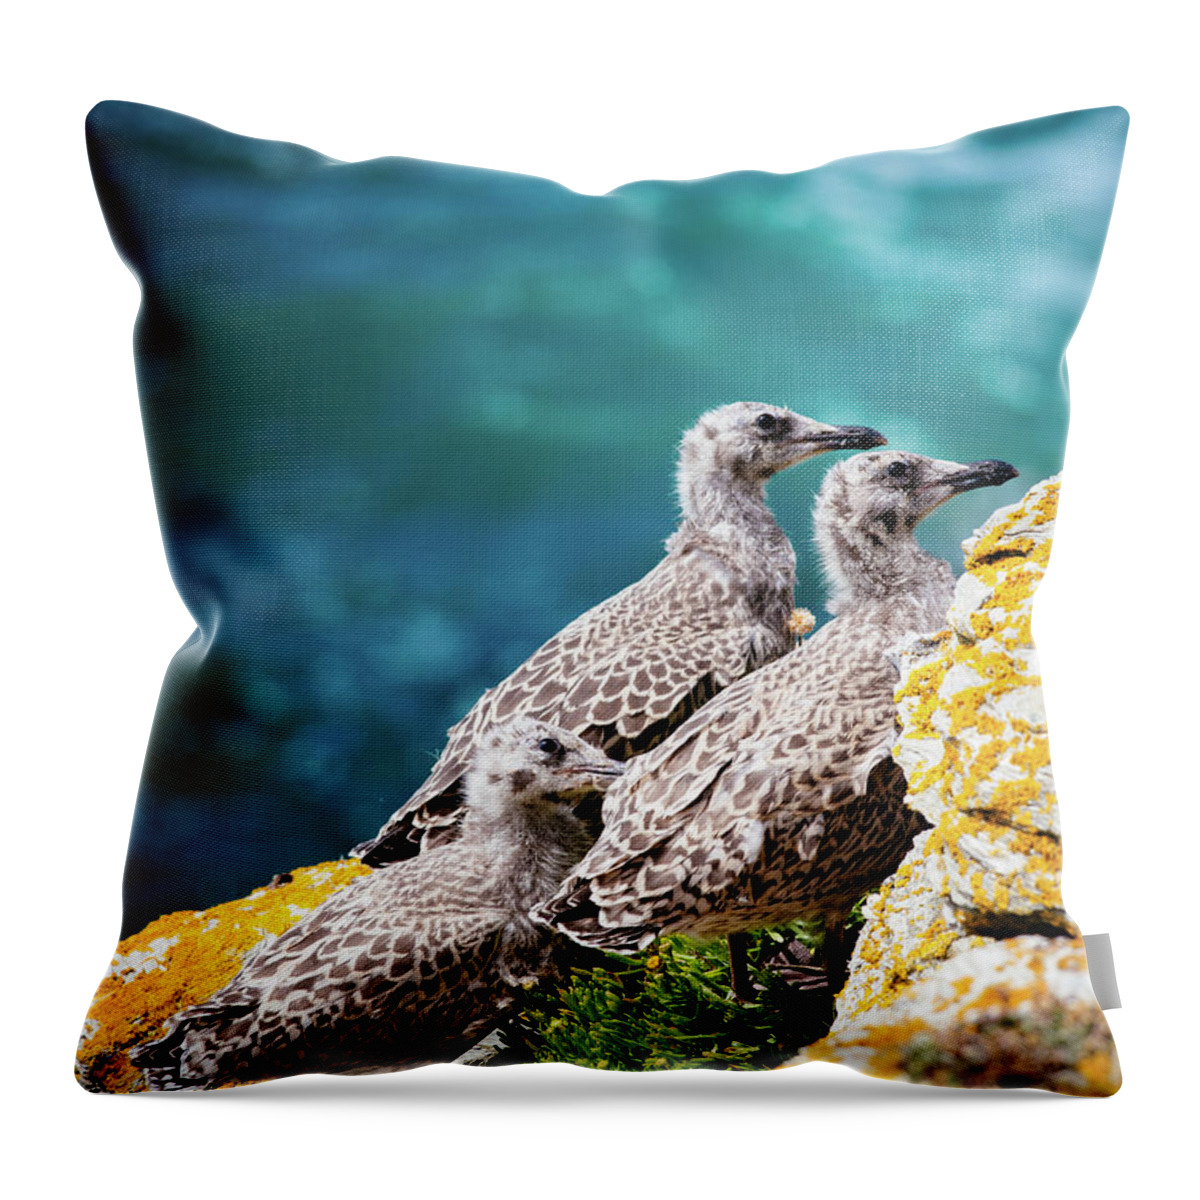 Animal Themes Throw Pillow featuring the photograph Baby Seagulls On Rocky Seashore Cliff by Miemo Penttinen - Miemo.net